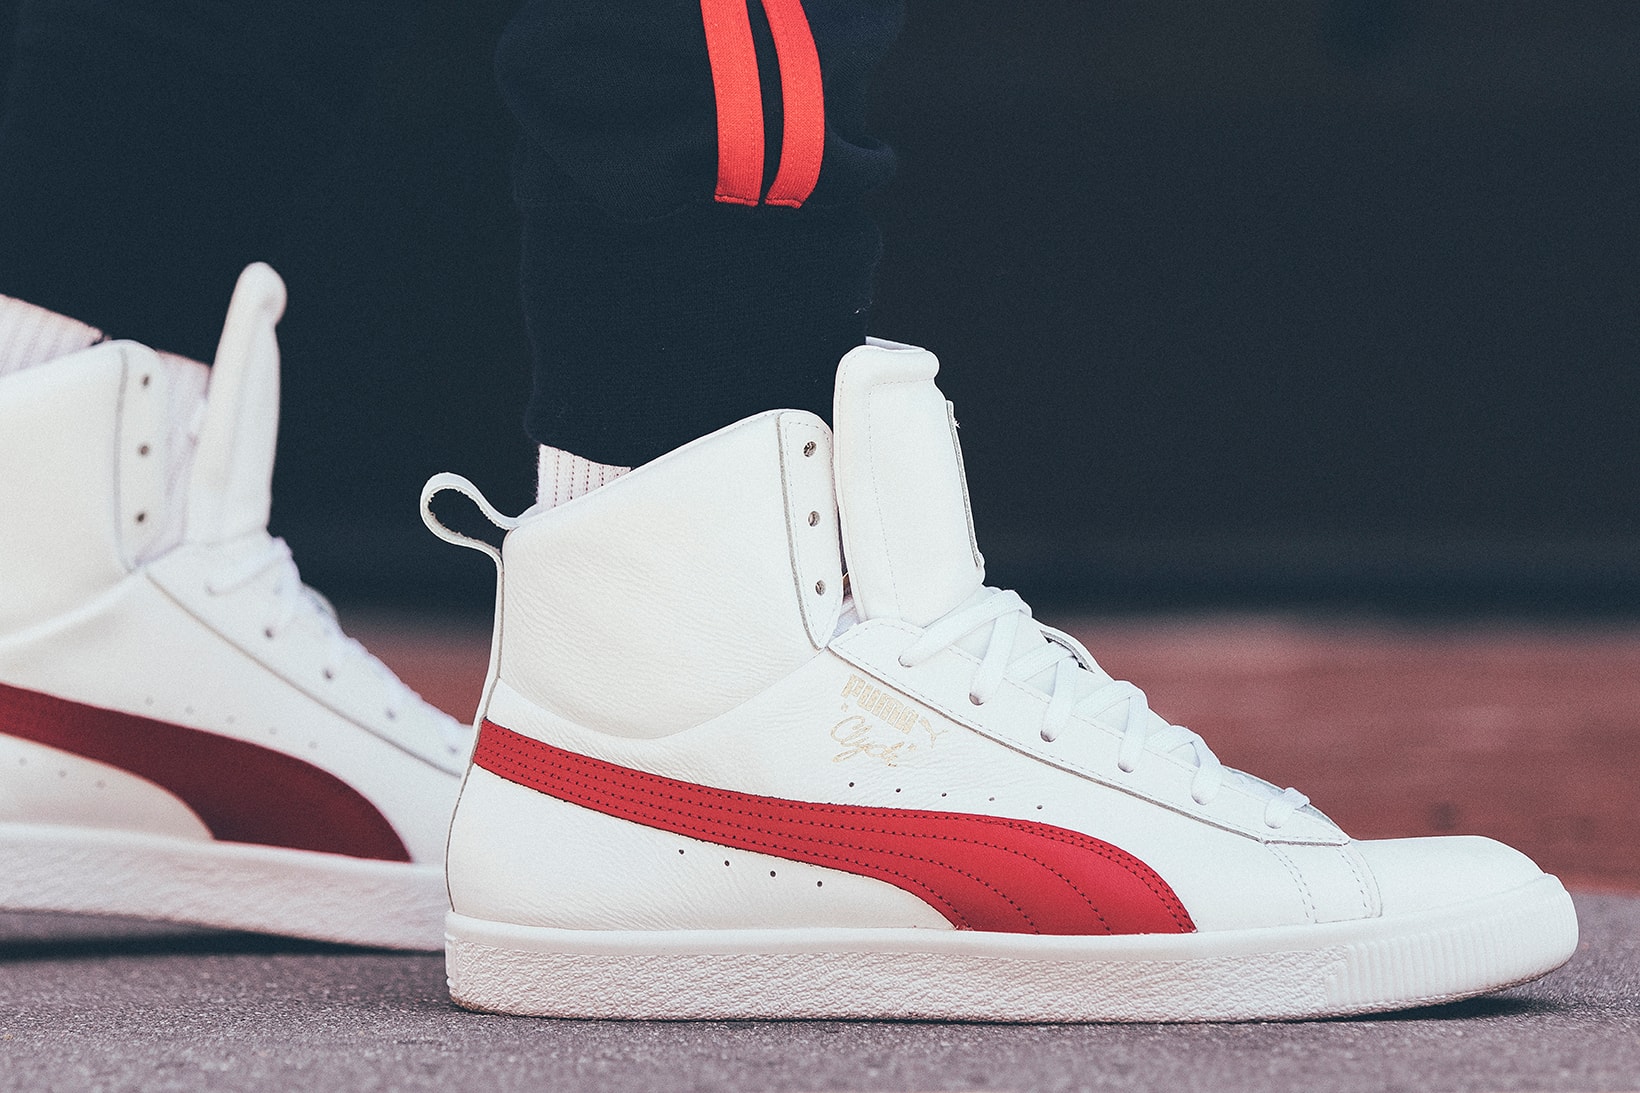 Puma Clyde Mid Foil Leather white sneakers side profile